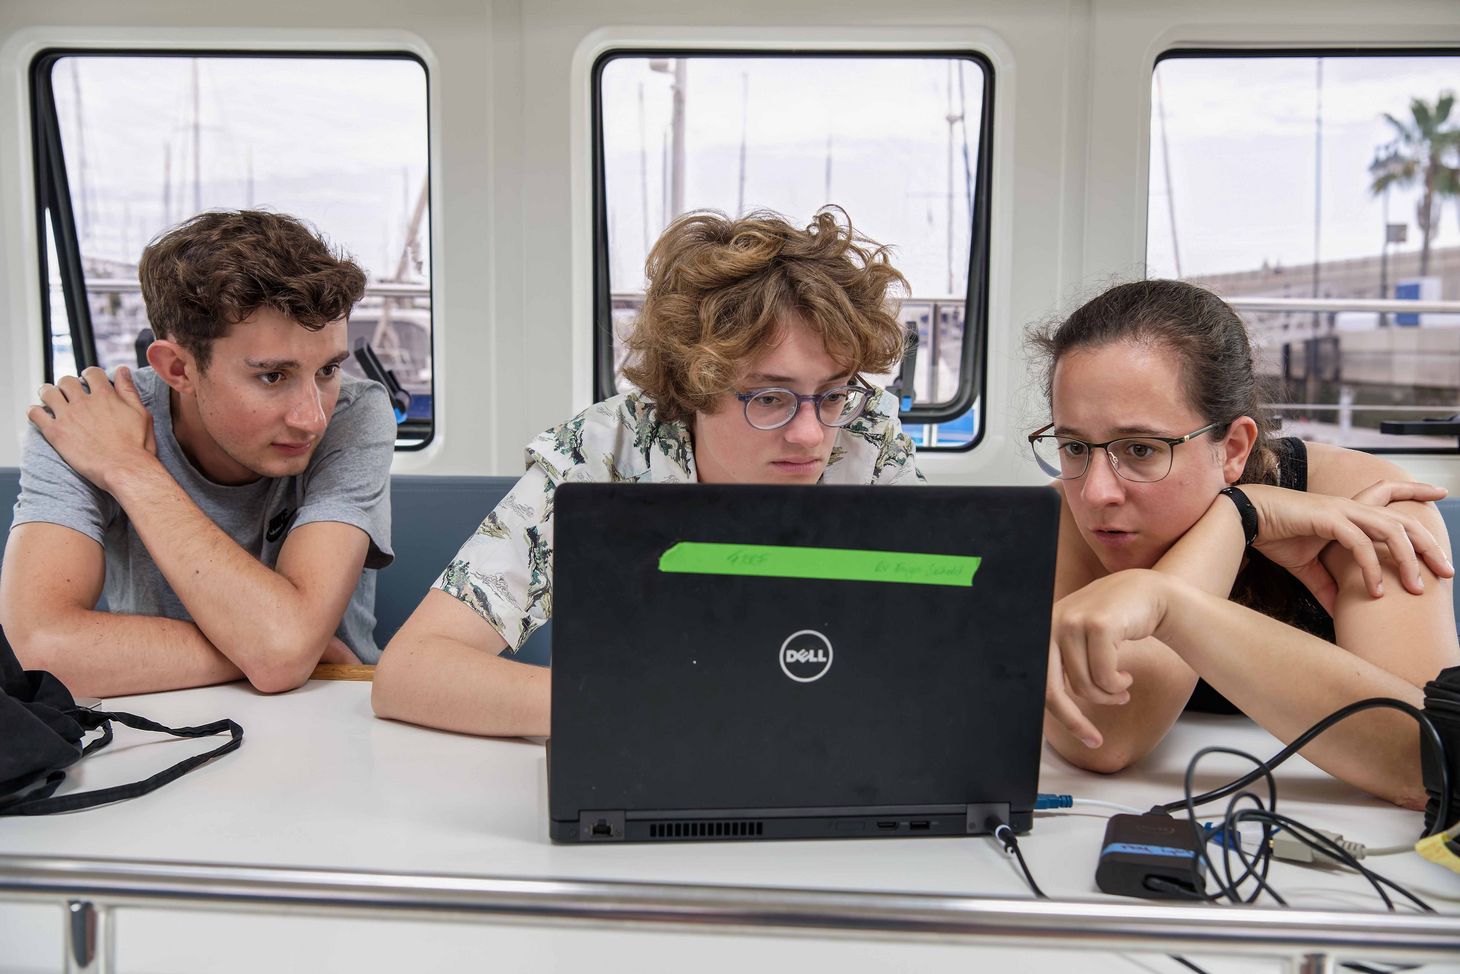 The three students while analyzing the plankton samples.